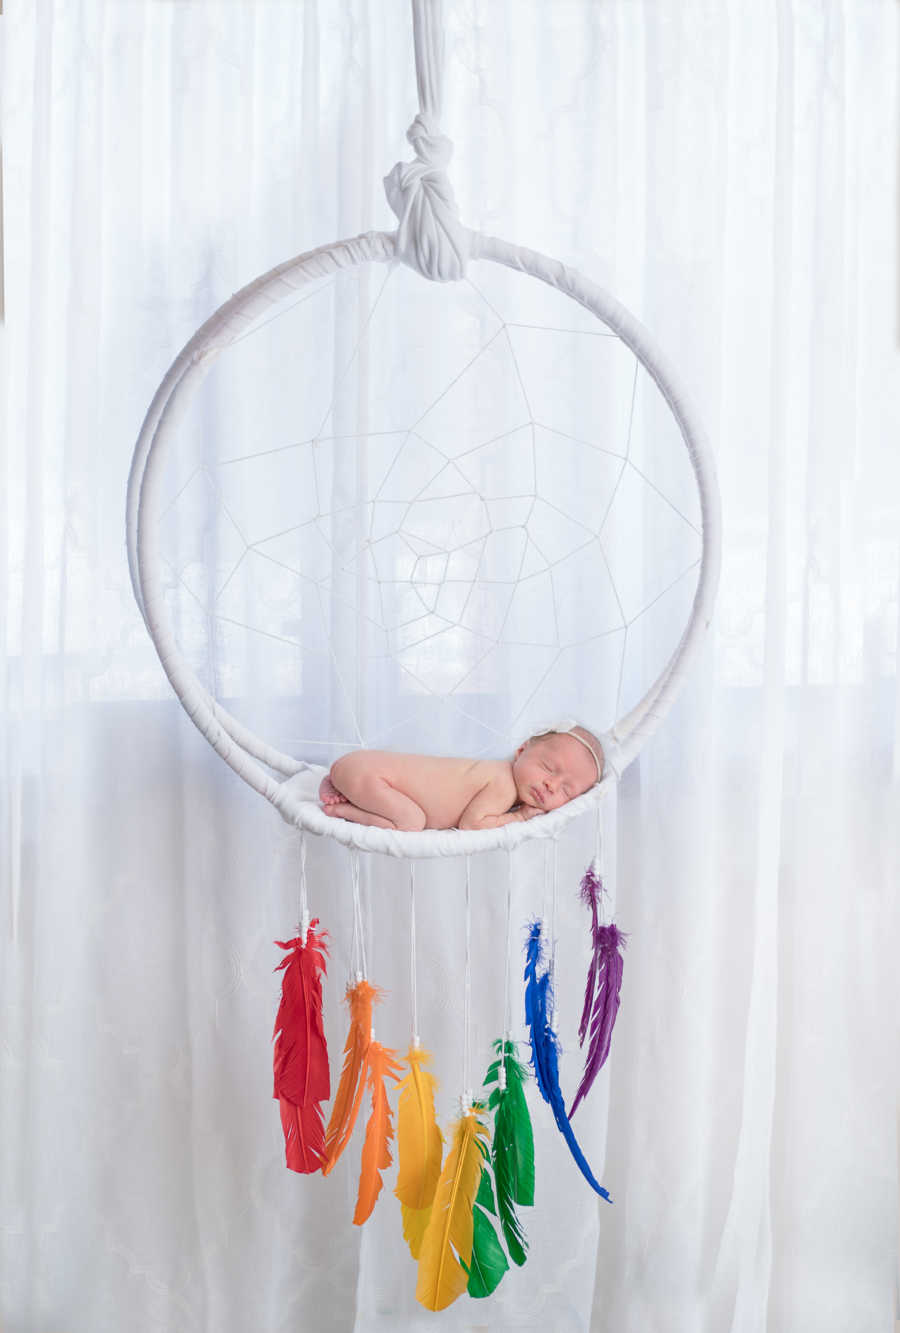 Newborn lying in large dream catcher with rainbow feathers hanging from it